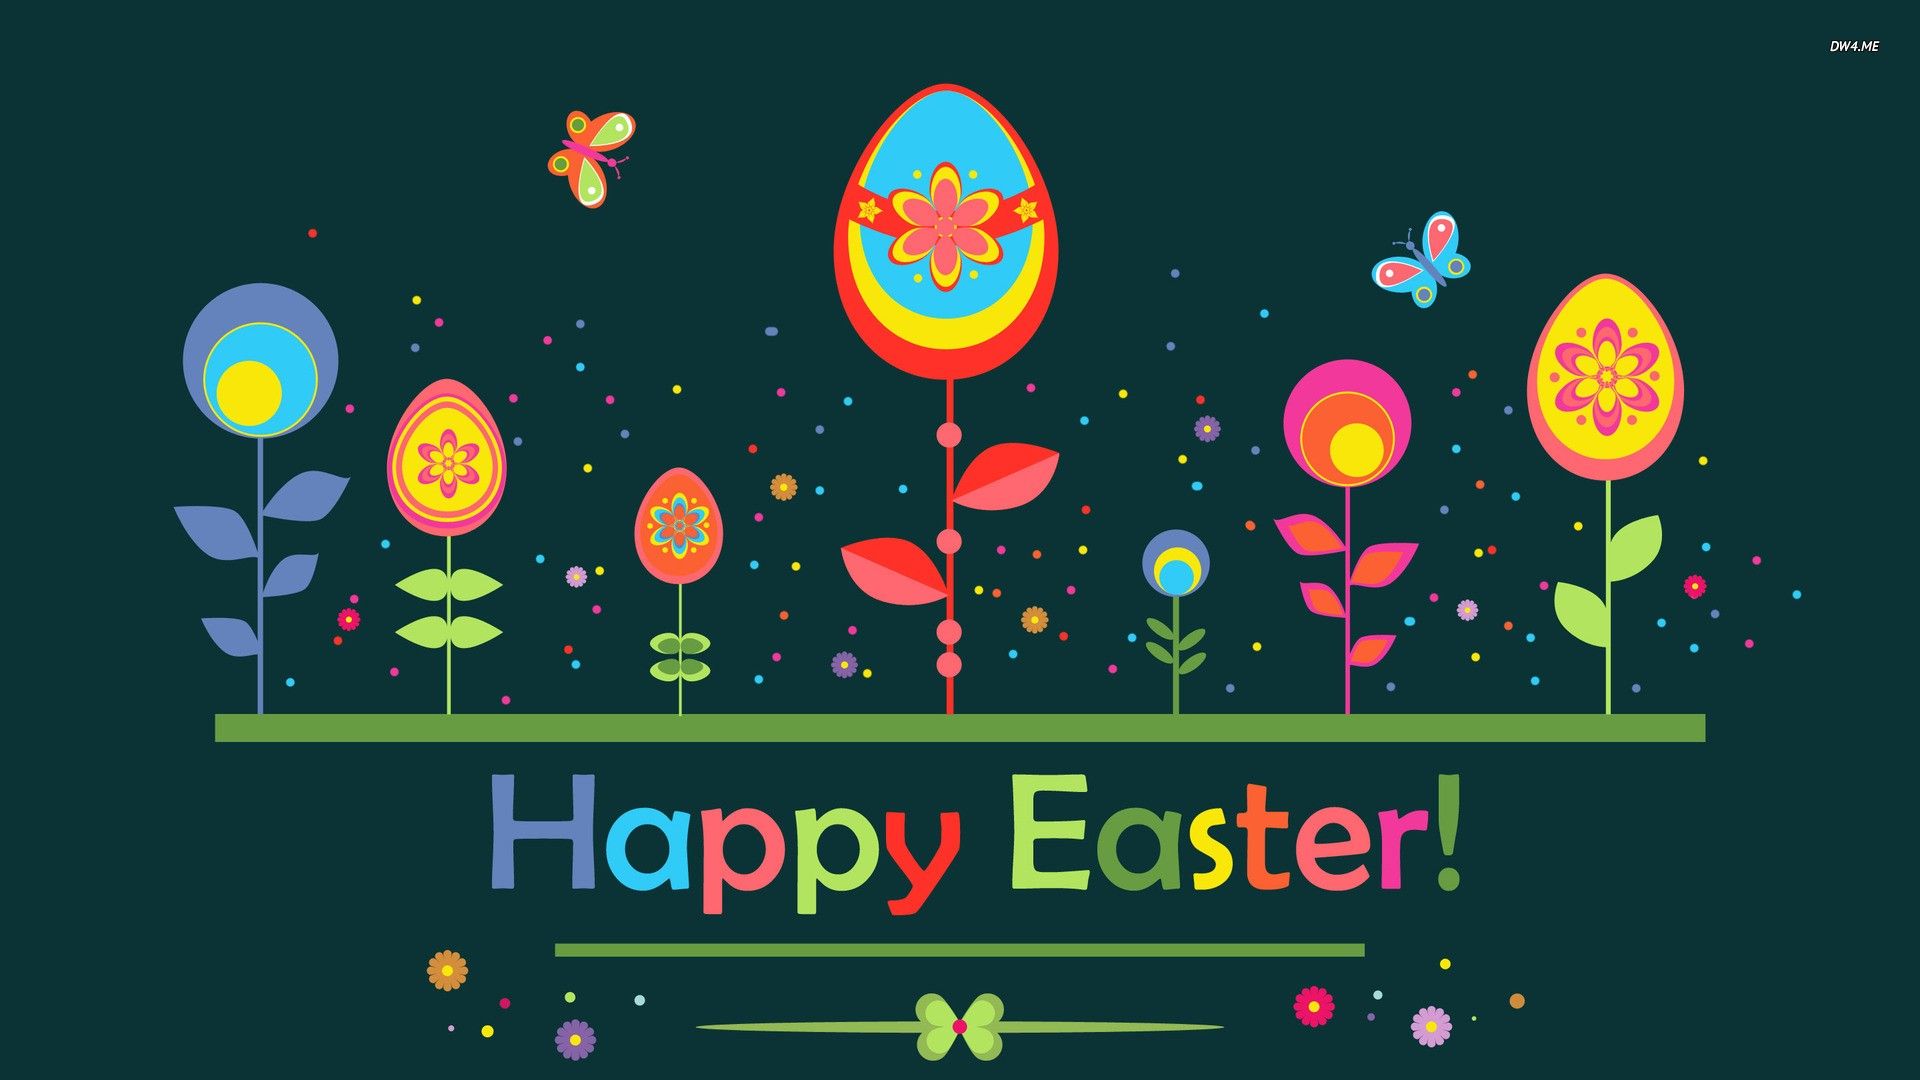 Happy Easter Wallpaper Cool Image Download 4k High Definition Artwork Background Wallpaper Picture Widescreen 1920x1080. Full HD Wallpaper